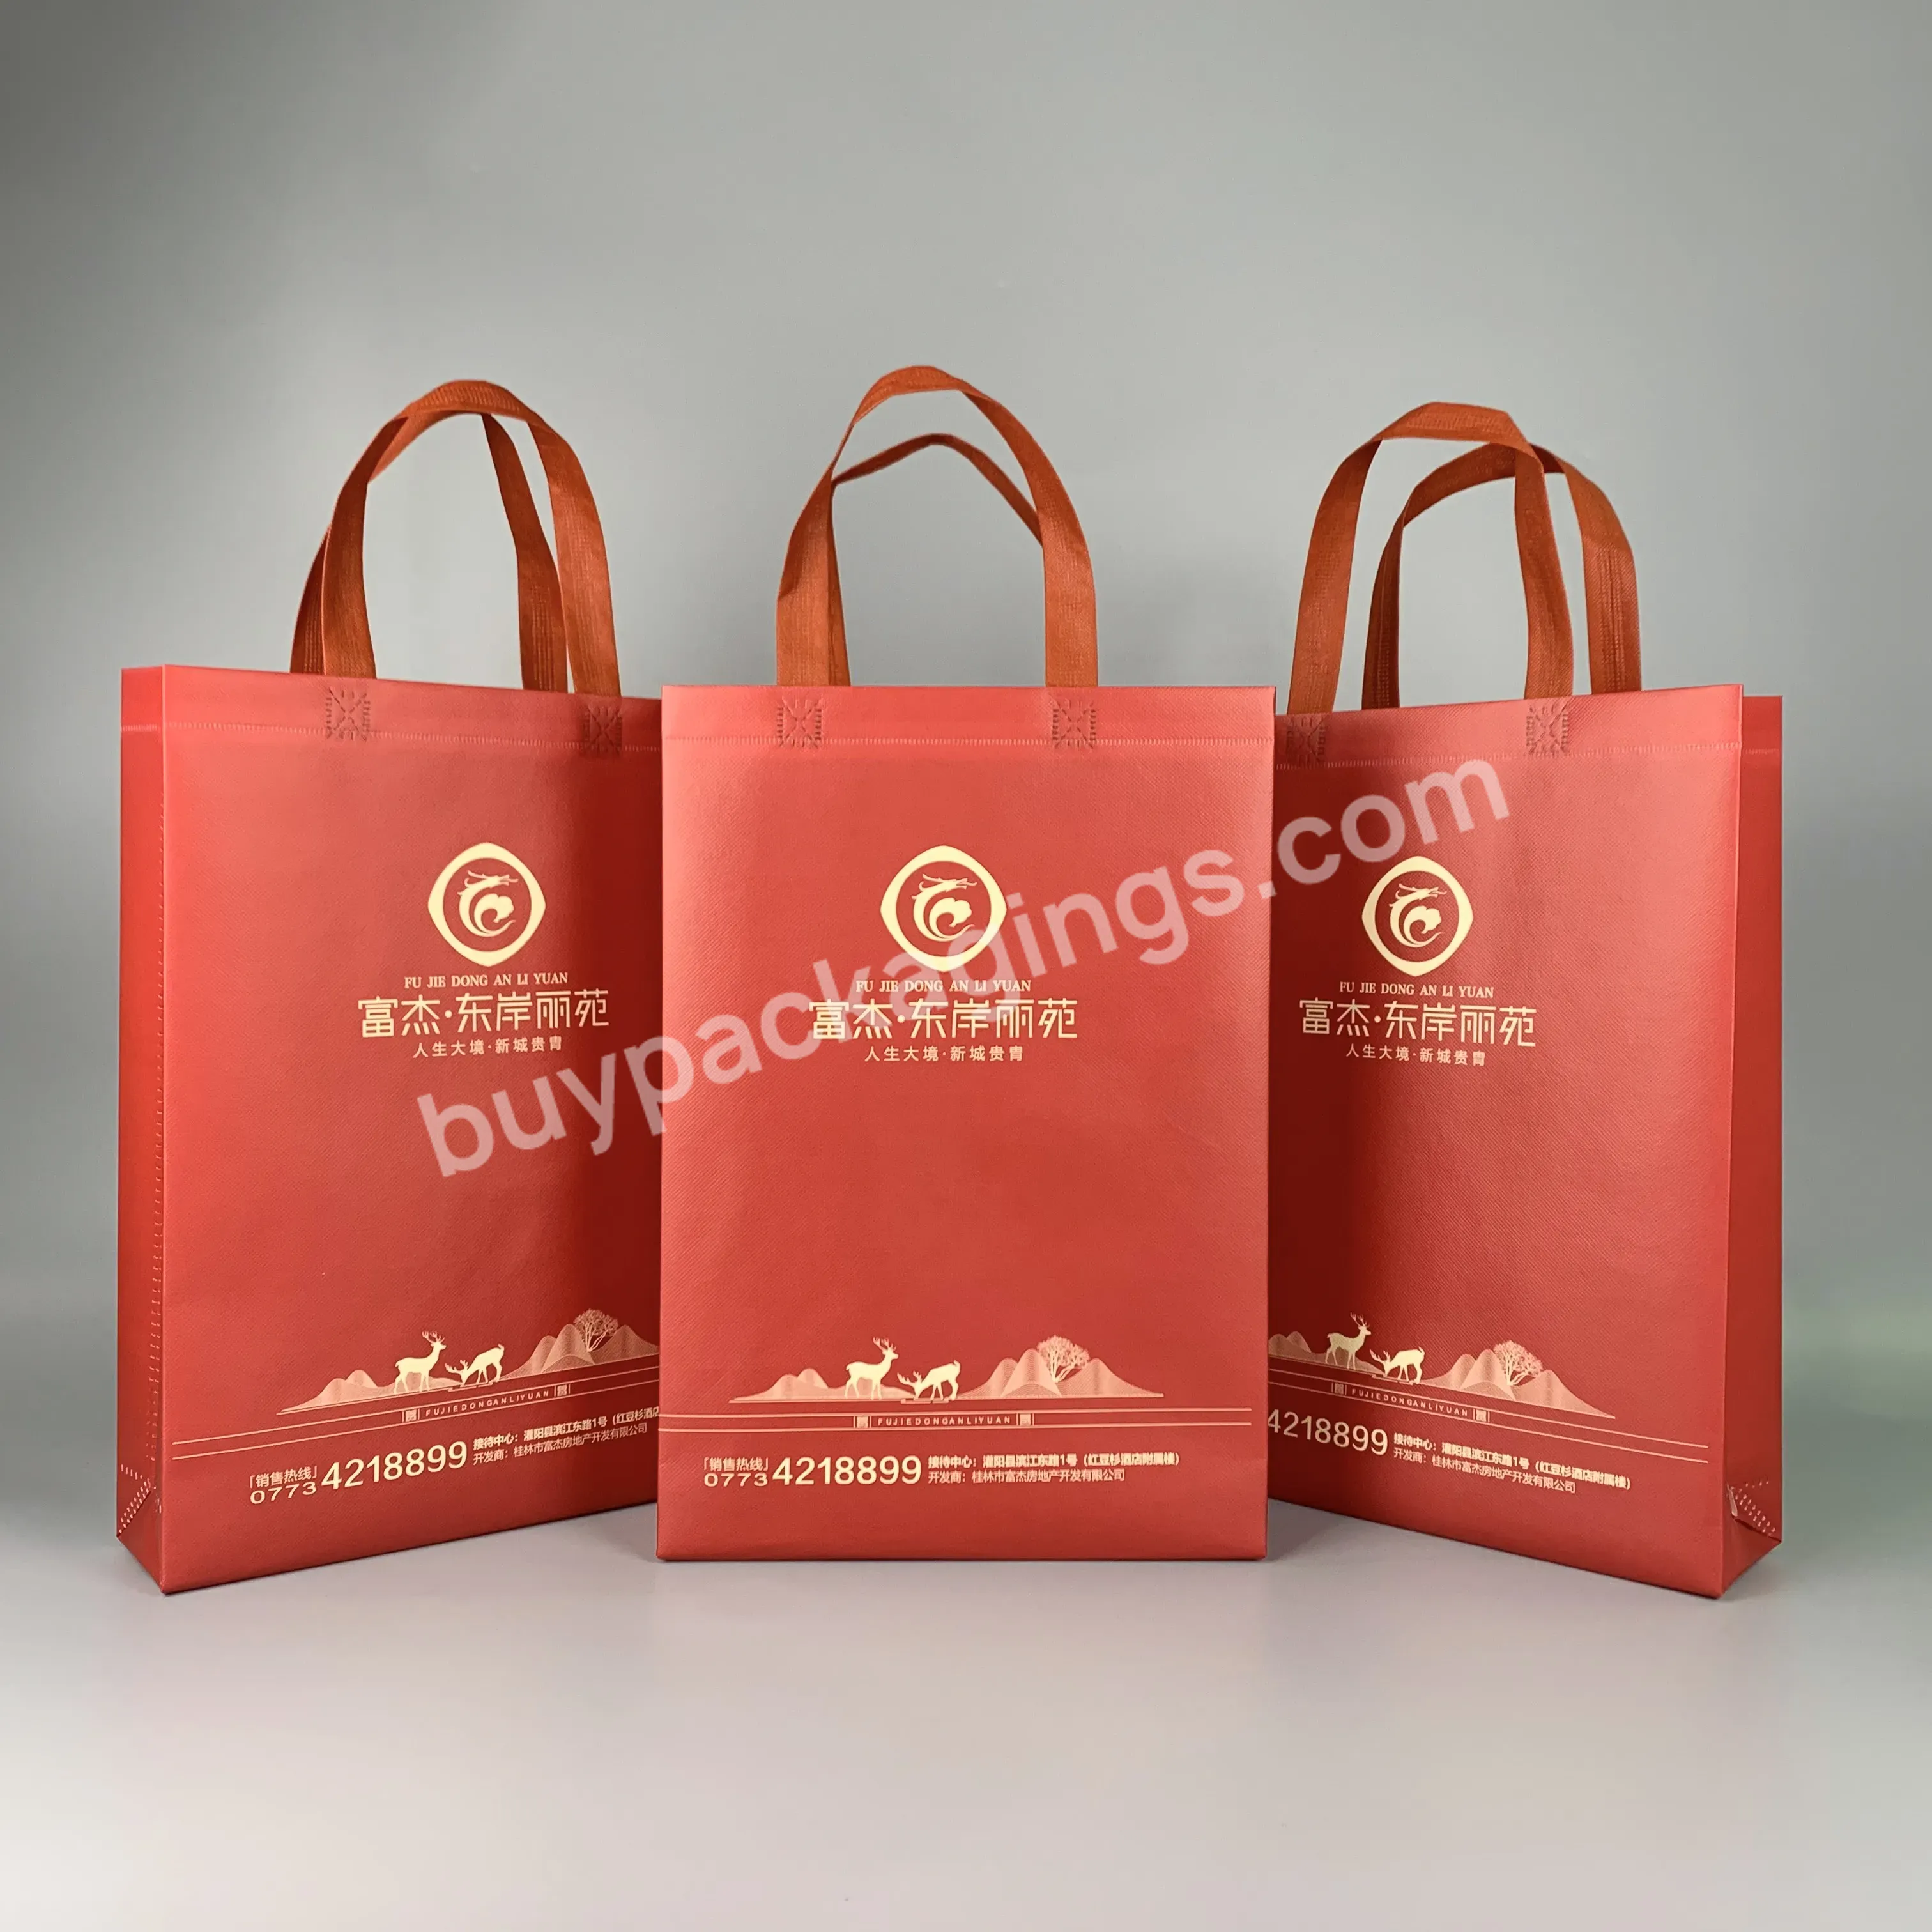 New Design Ecological Recyclable Colorful Waterproof Customized Logo Non Woven Bag For Gift Packing - Buy New Design Ecological Shopping Bag,Recyclable Waterproof Non Woven Bag,Customized Non Woven Bag With Logo.